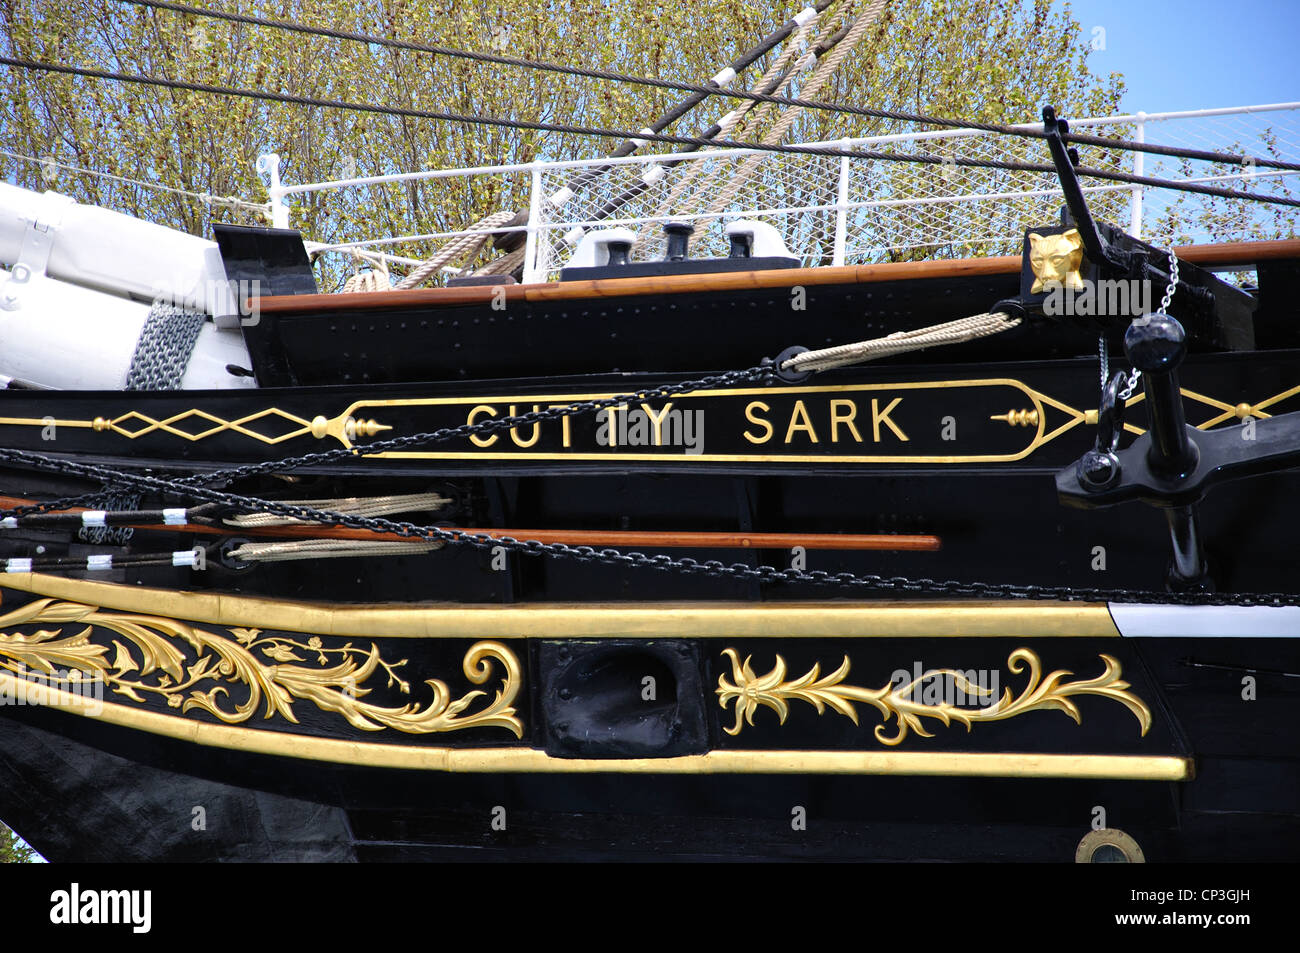 The restored 'Cutty Sark' Clipper Ship's bow, Greenwich, London Borough of Greenwich, Greater London, England, United Kingdom Stock Photo